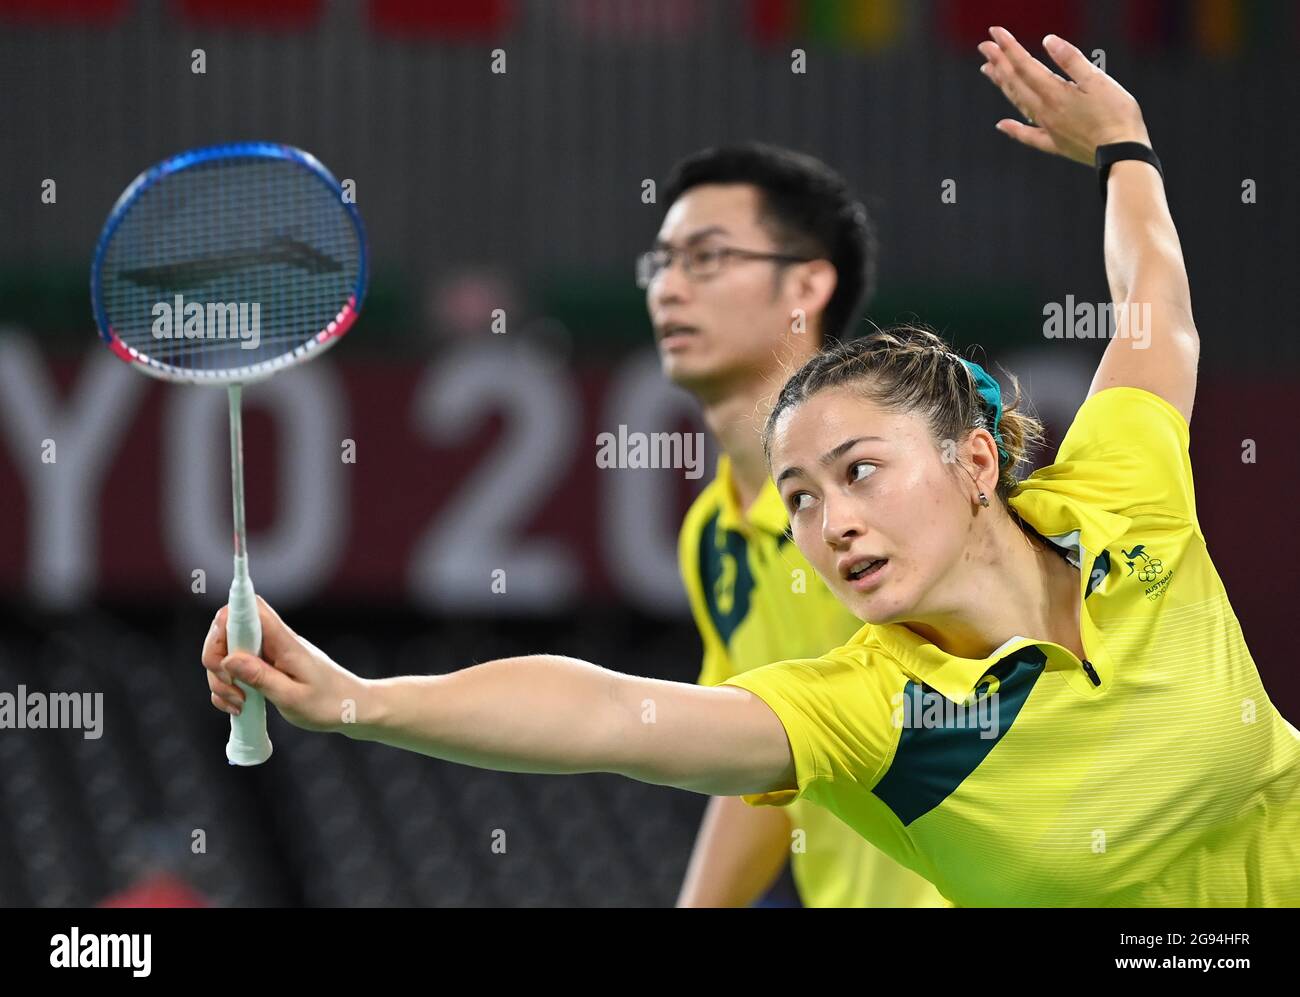 Tokyo, Japan. 24th July, 2021. Badminton. Musashino Forest Sport Plaza.  290-11. Nishimachi. Chofu-shi. Tokyo. Gronya Somerville (AUS) during the  mixed doubles group stage. Group C. Credit Garry Bowden/Sport in  Pictures/Alamy live news